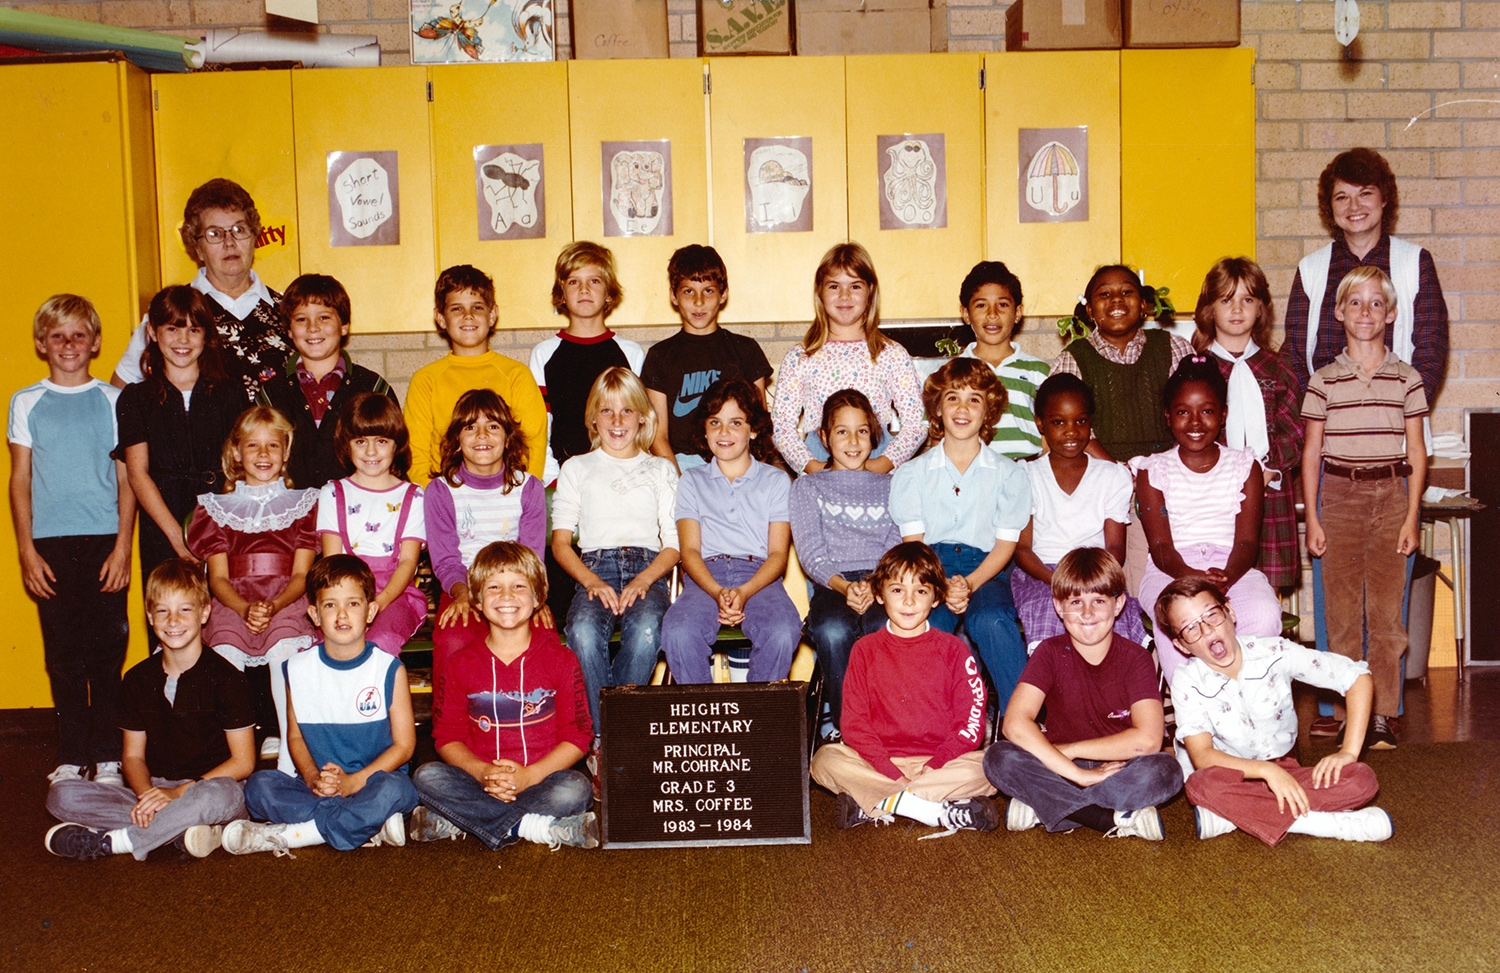 Susann Keohane, in the back, second from right standing directly next to her third grade teacher Mrs. Coffee, back right, and her third grade class in an old school photo.